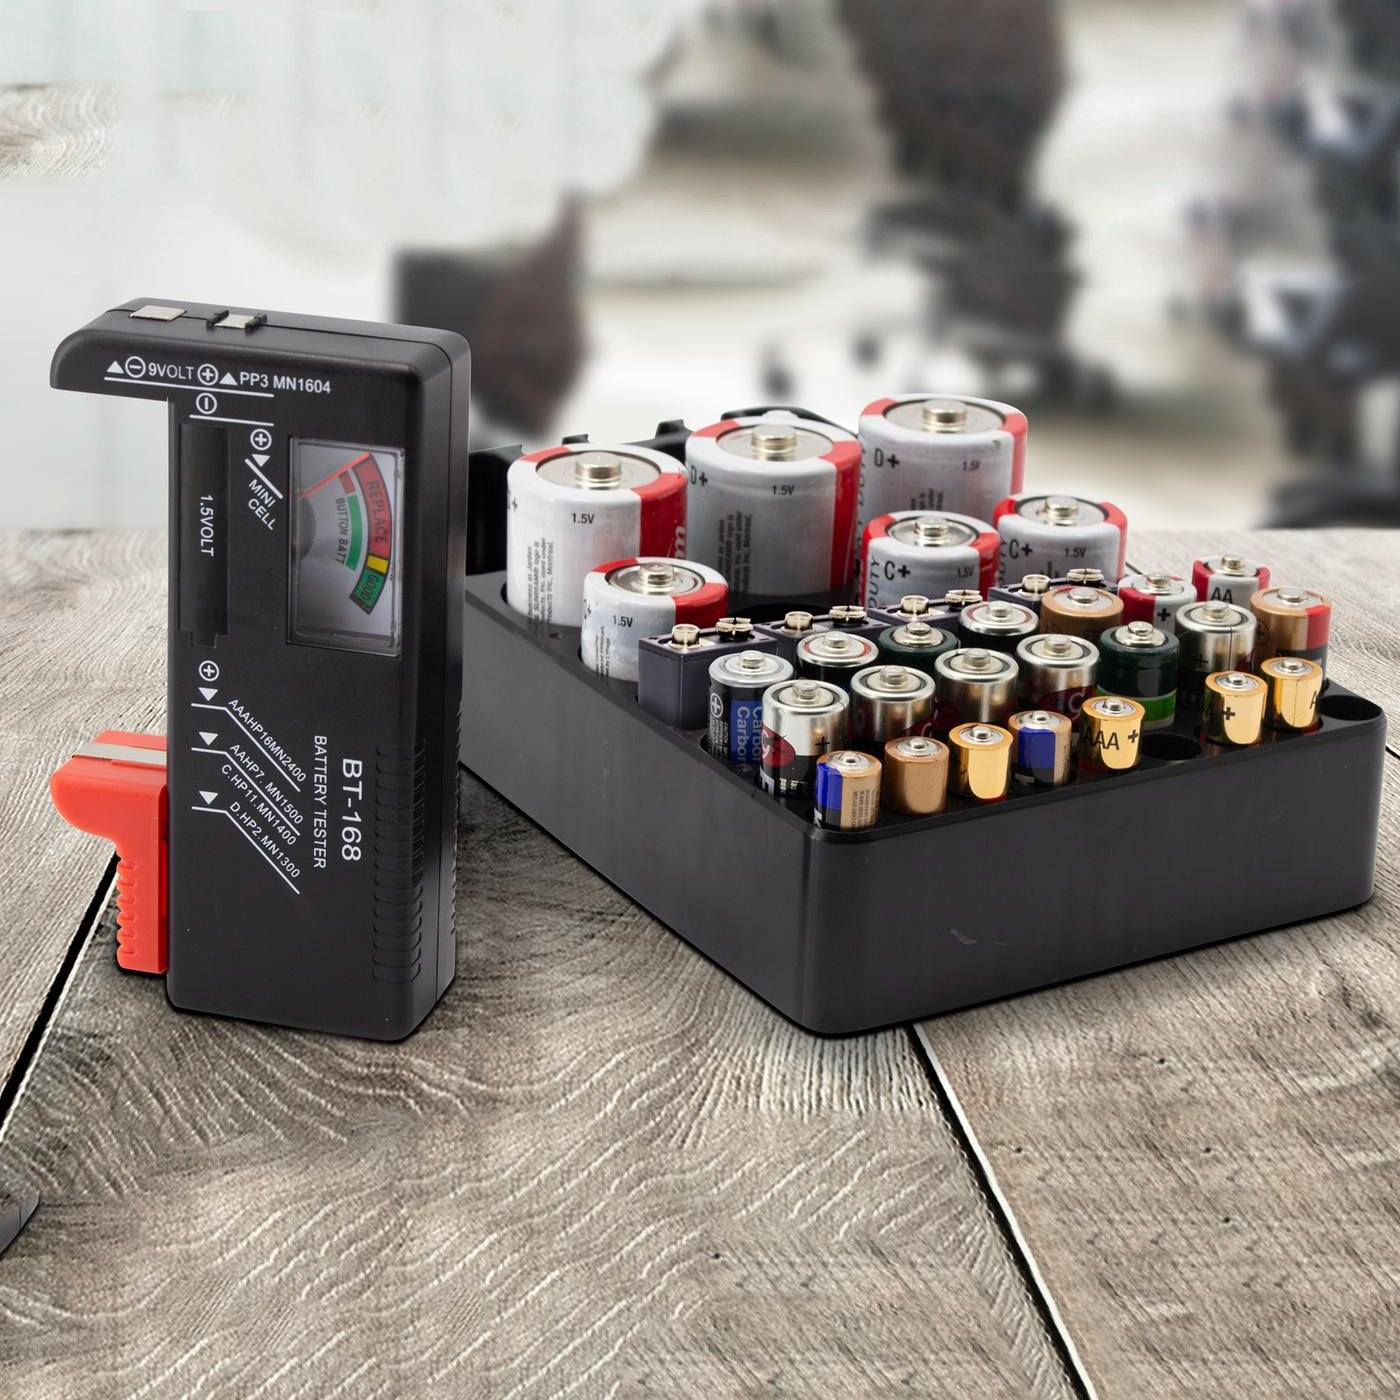 Battery Tester and Storage Case Organizer